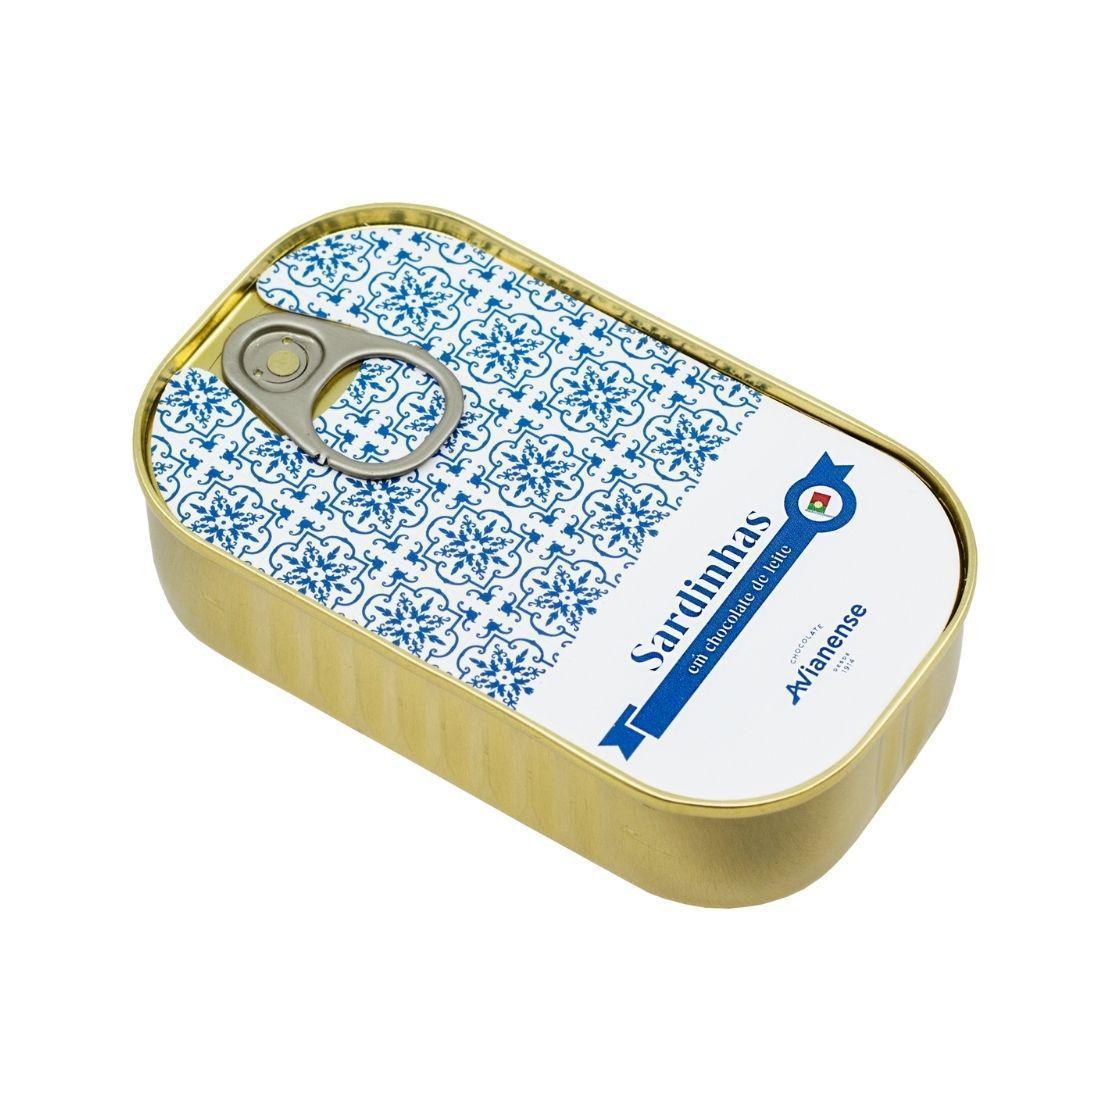 Avianense Chocolate - Small Chocolate Sardine in a can decorated with the traditional portuguese tiles